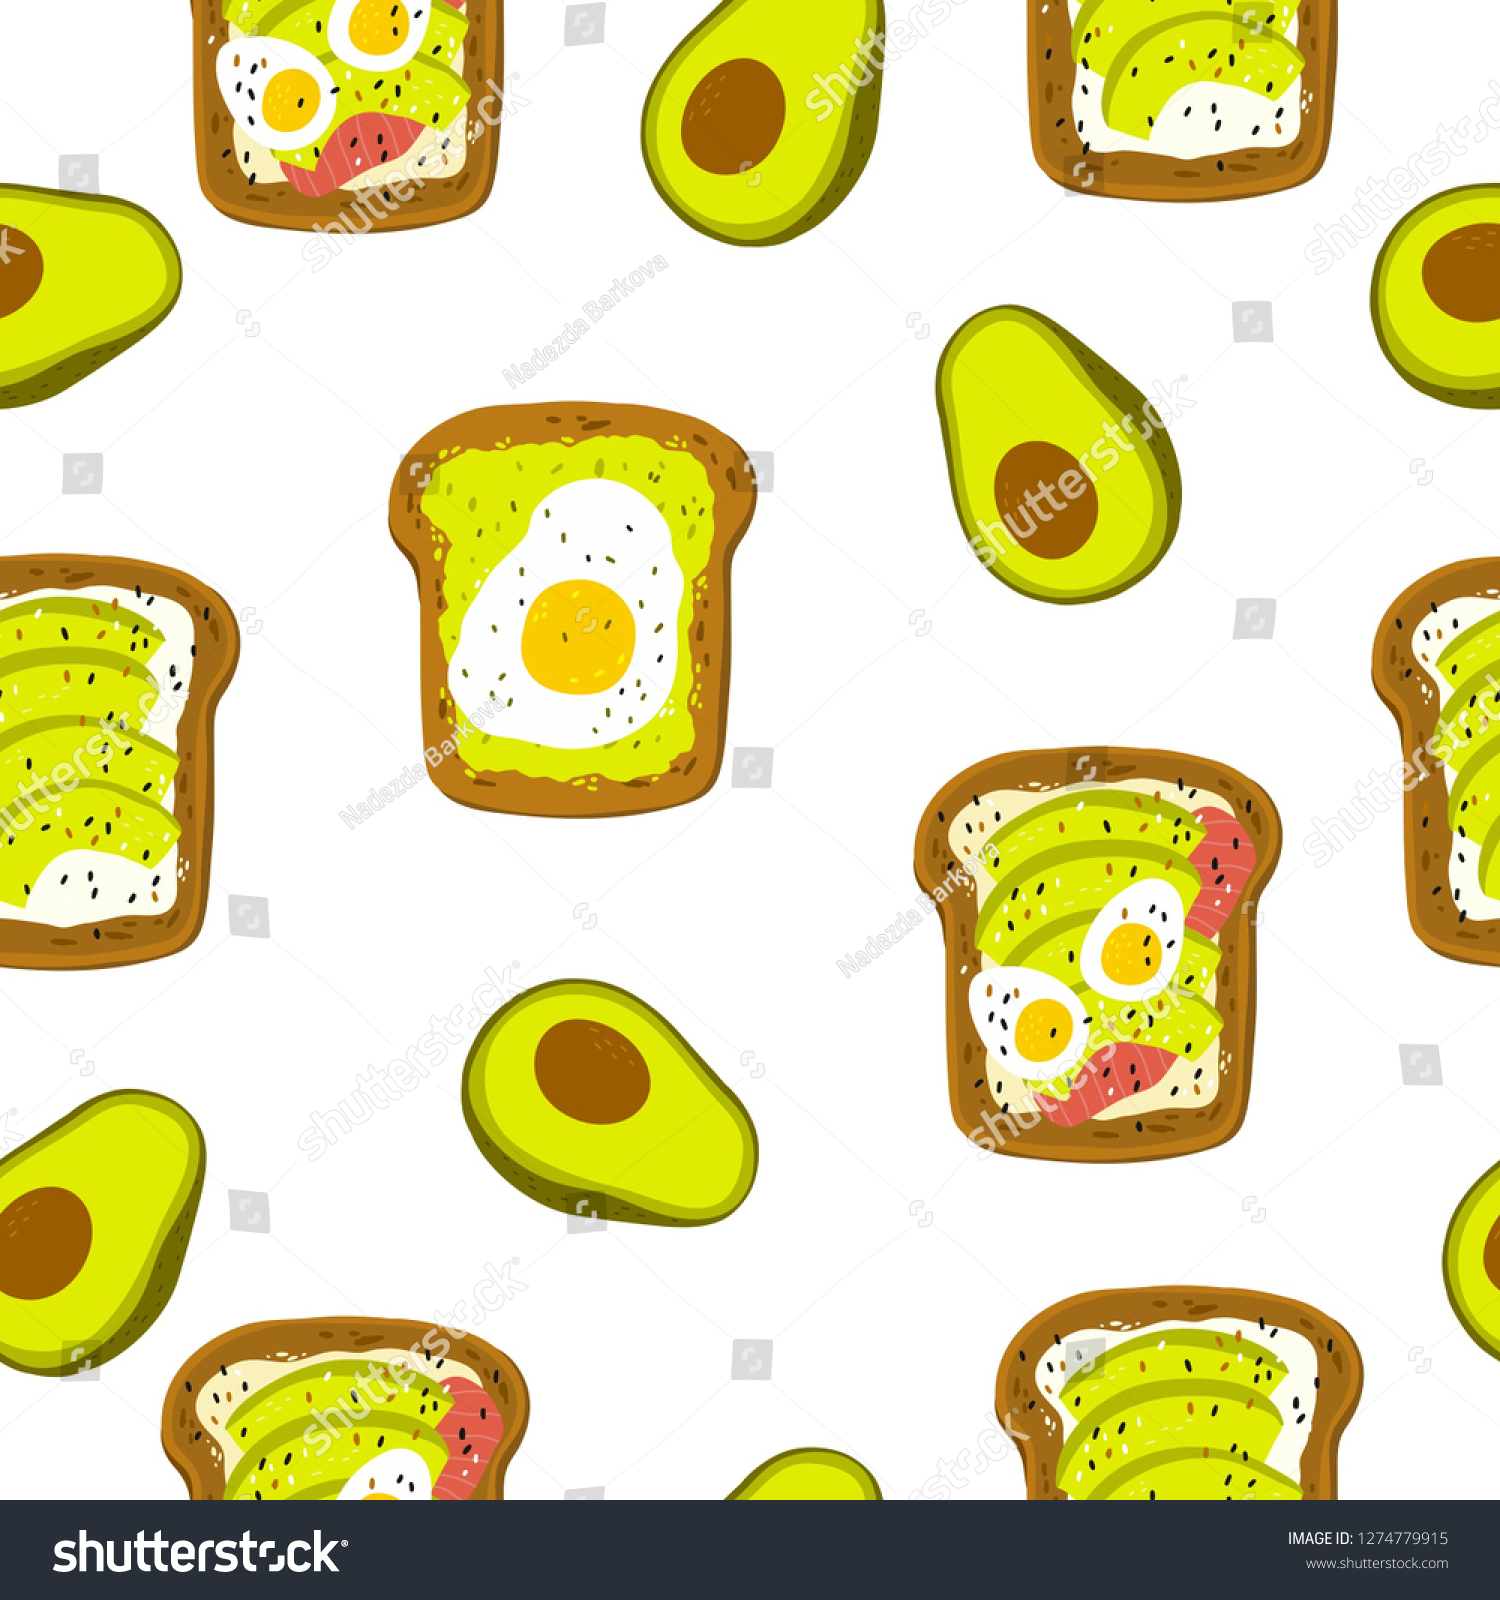 SVG of Avocado toast. Hand drawn vector illustration. Healthy wholesome breakfast with green avocado toast and egg. Seamless pattern svg